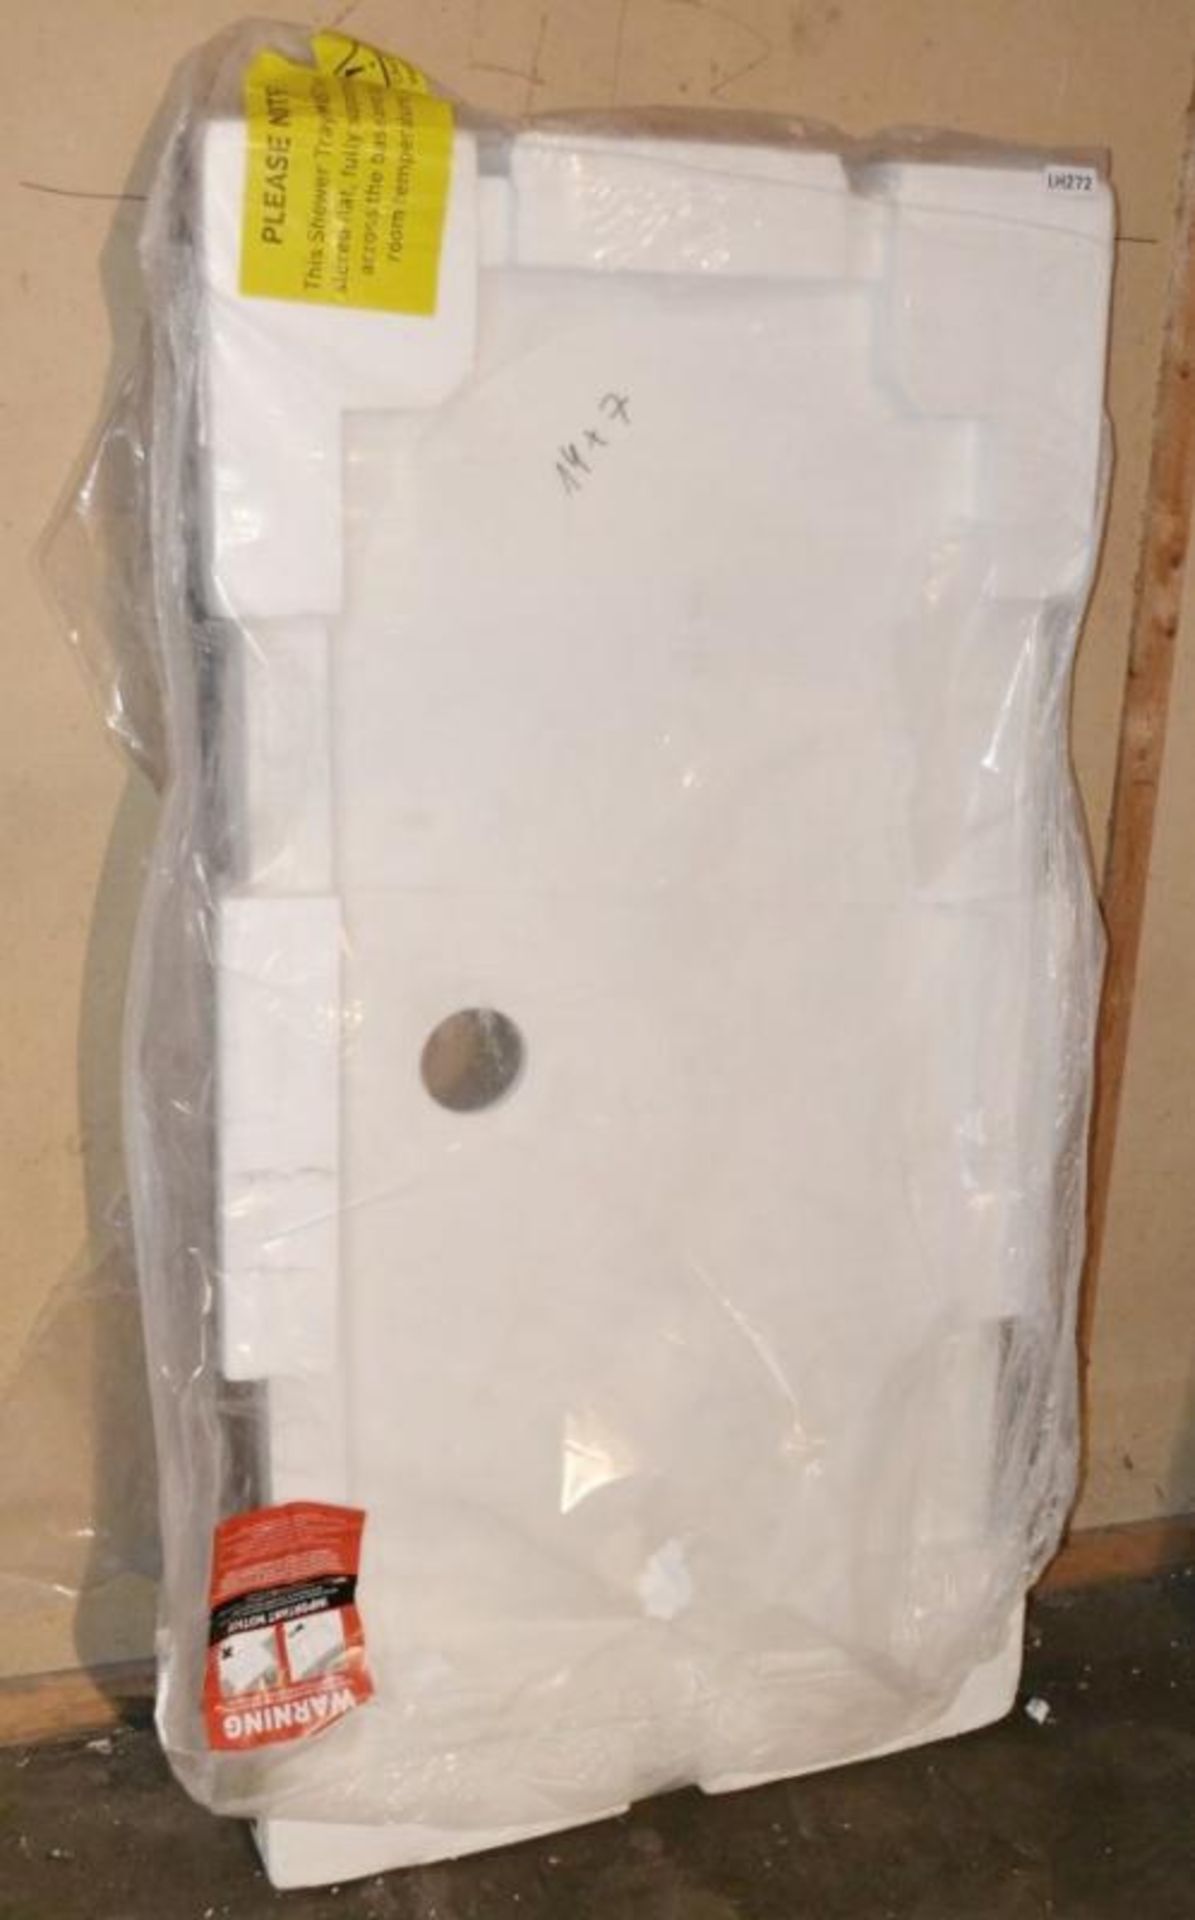 1 x Orchard Rectangular Slimline Stone Shower Tray (TR39) - New / Unused Stock - Dimensions: 1400 x - Image 3 of 4